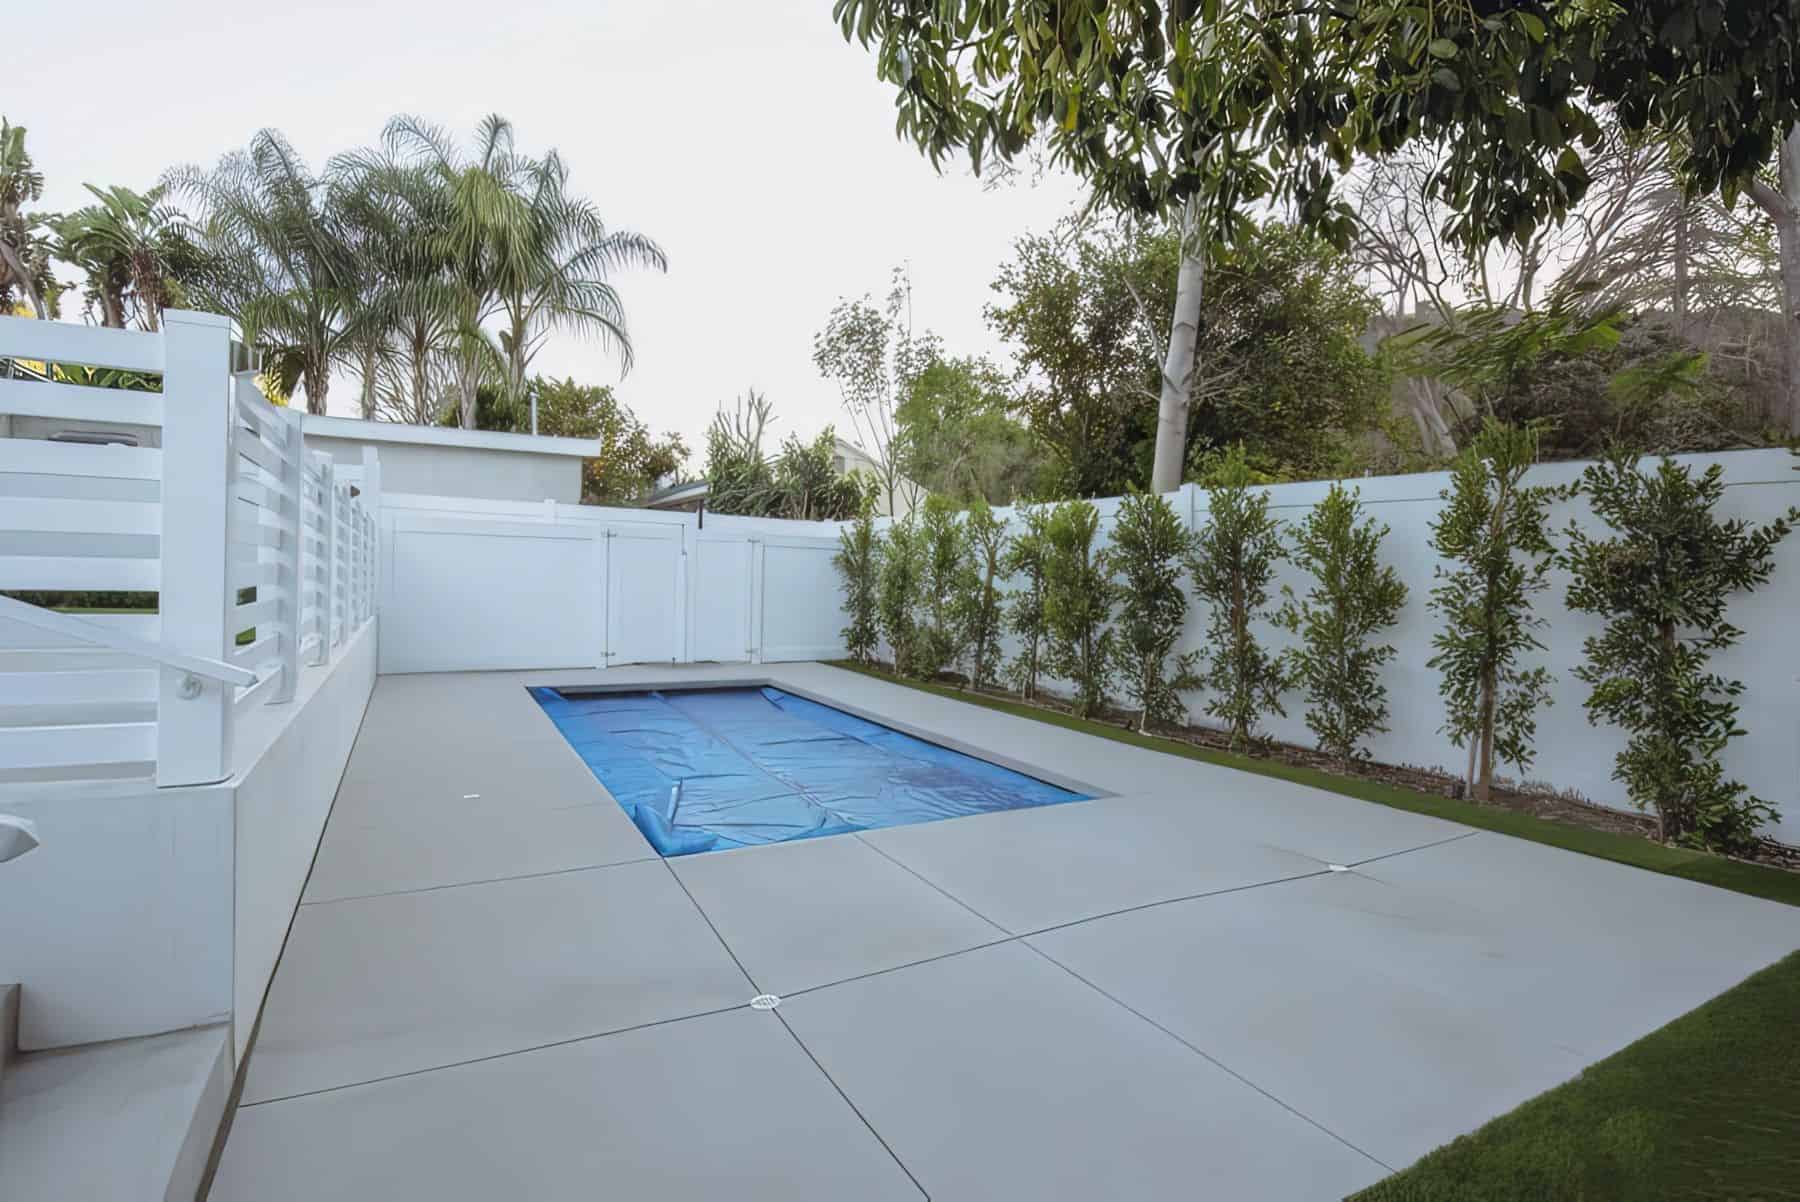 Vinyl pool fence separating marble flooring and comfortable seating from the grassy lawn from the backyard